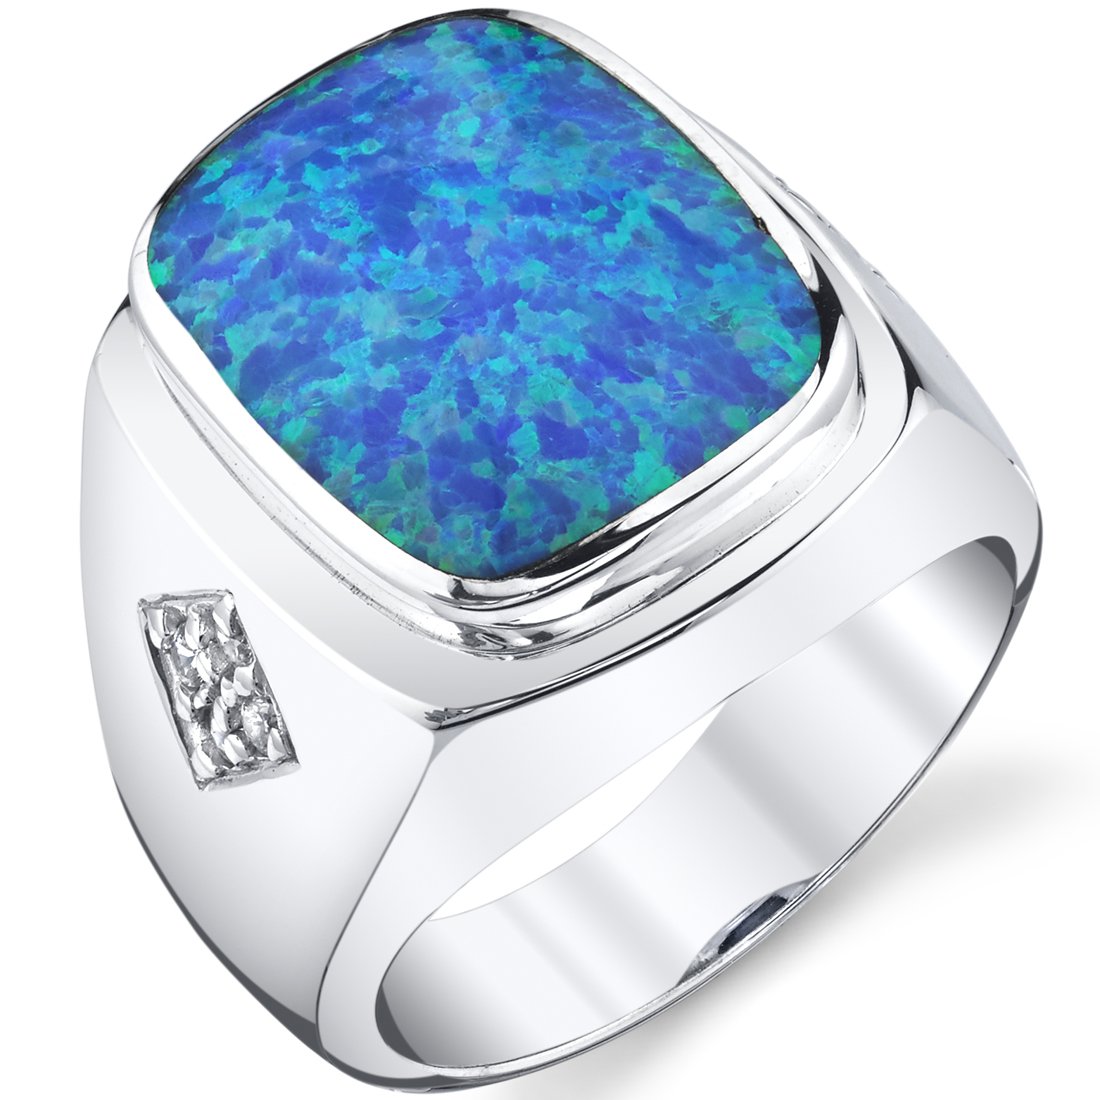 Peora Men's Created Blue Fire Opal Knight Signet Ring 925 Sterling Silver, Large 15x12mm Cushion Cut, Sizes 8 to 13